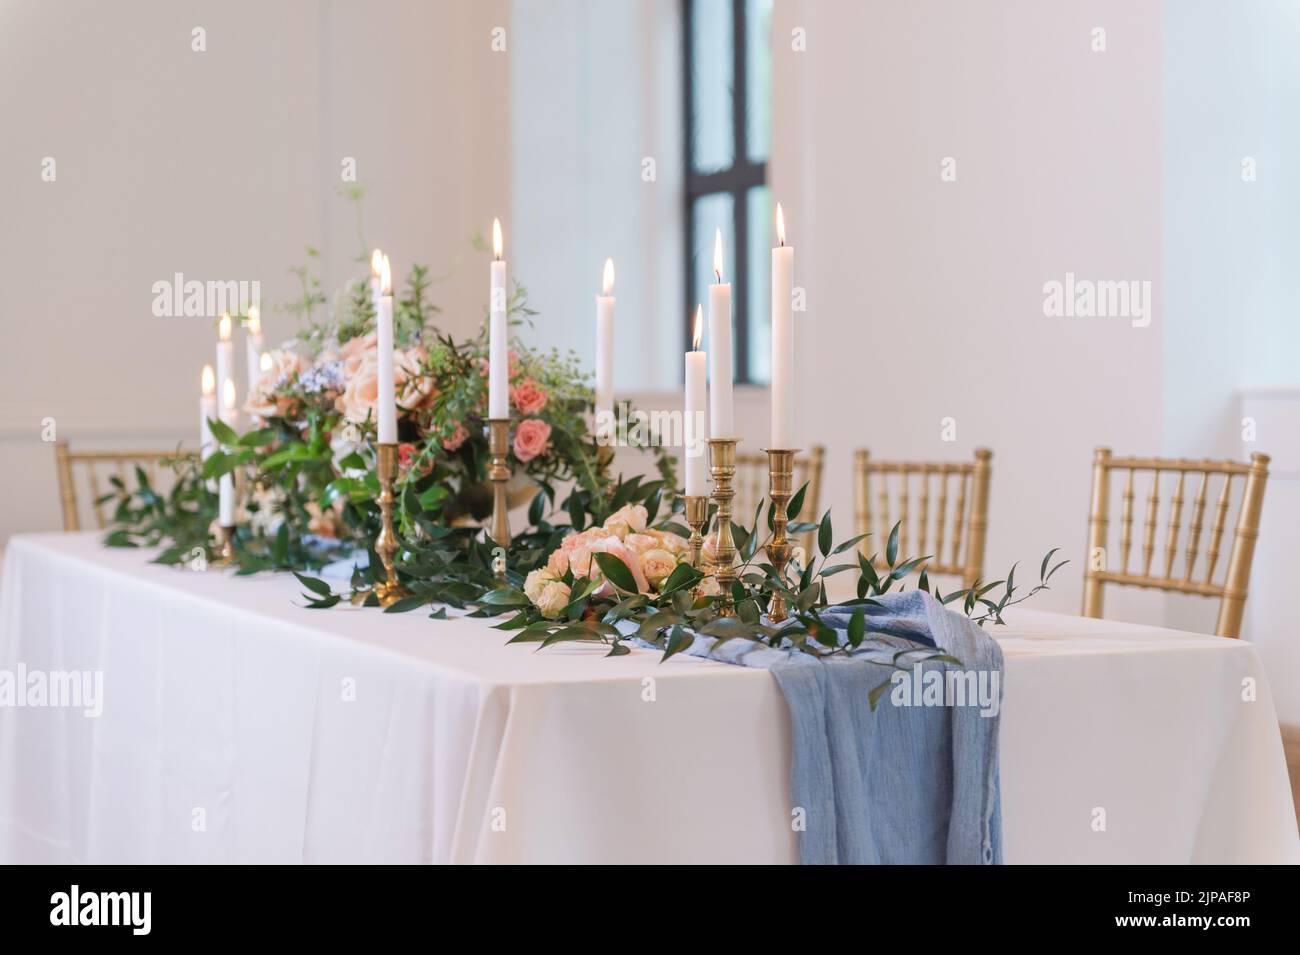 A wedding-style tablescape with a blue runner and elegant lit candles Stock Photo